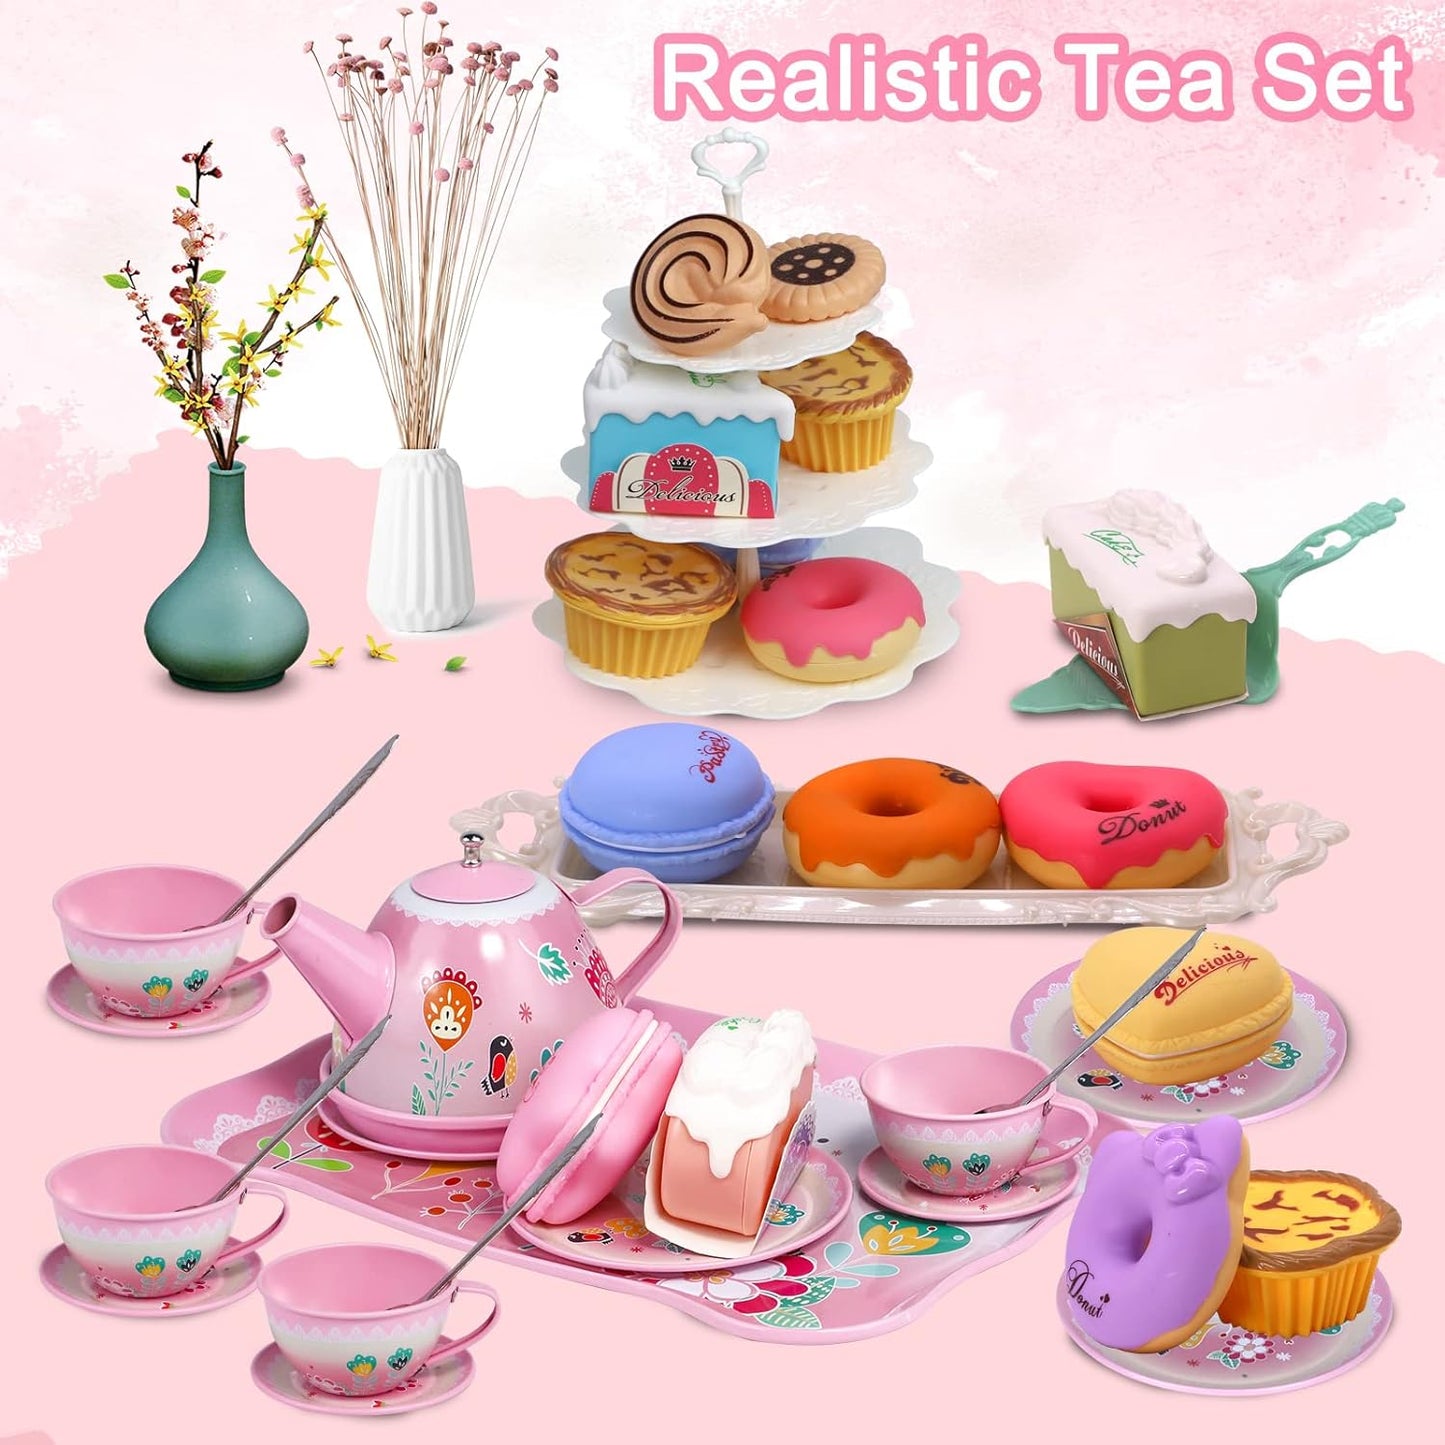 Tea Party Set for Little Girls,PRE-WORLD Princess Tea Time Toy Including Dessert,Cookies,Doughnut,Teapot Tray Cake, Tablecloth & Carrying Case,Kids Kitchen Pretend Play for Girls Boys Age 3-6